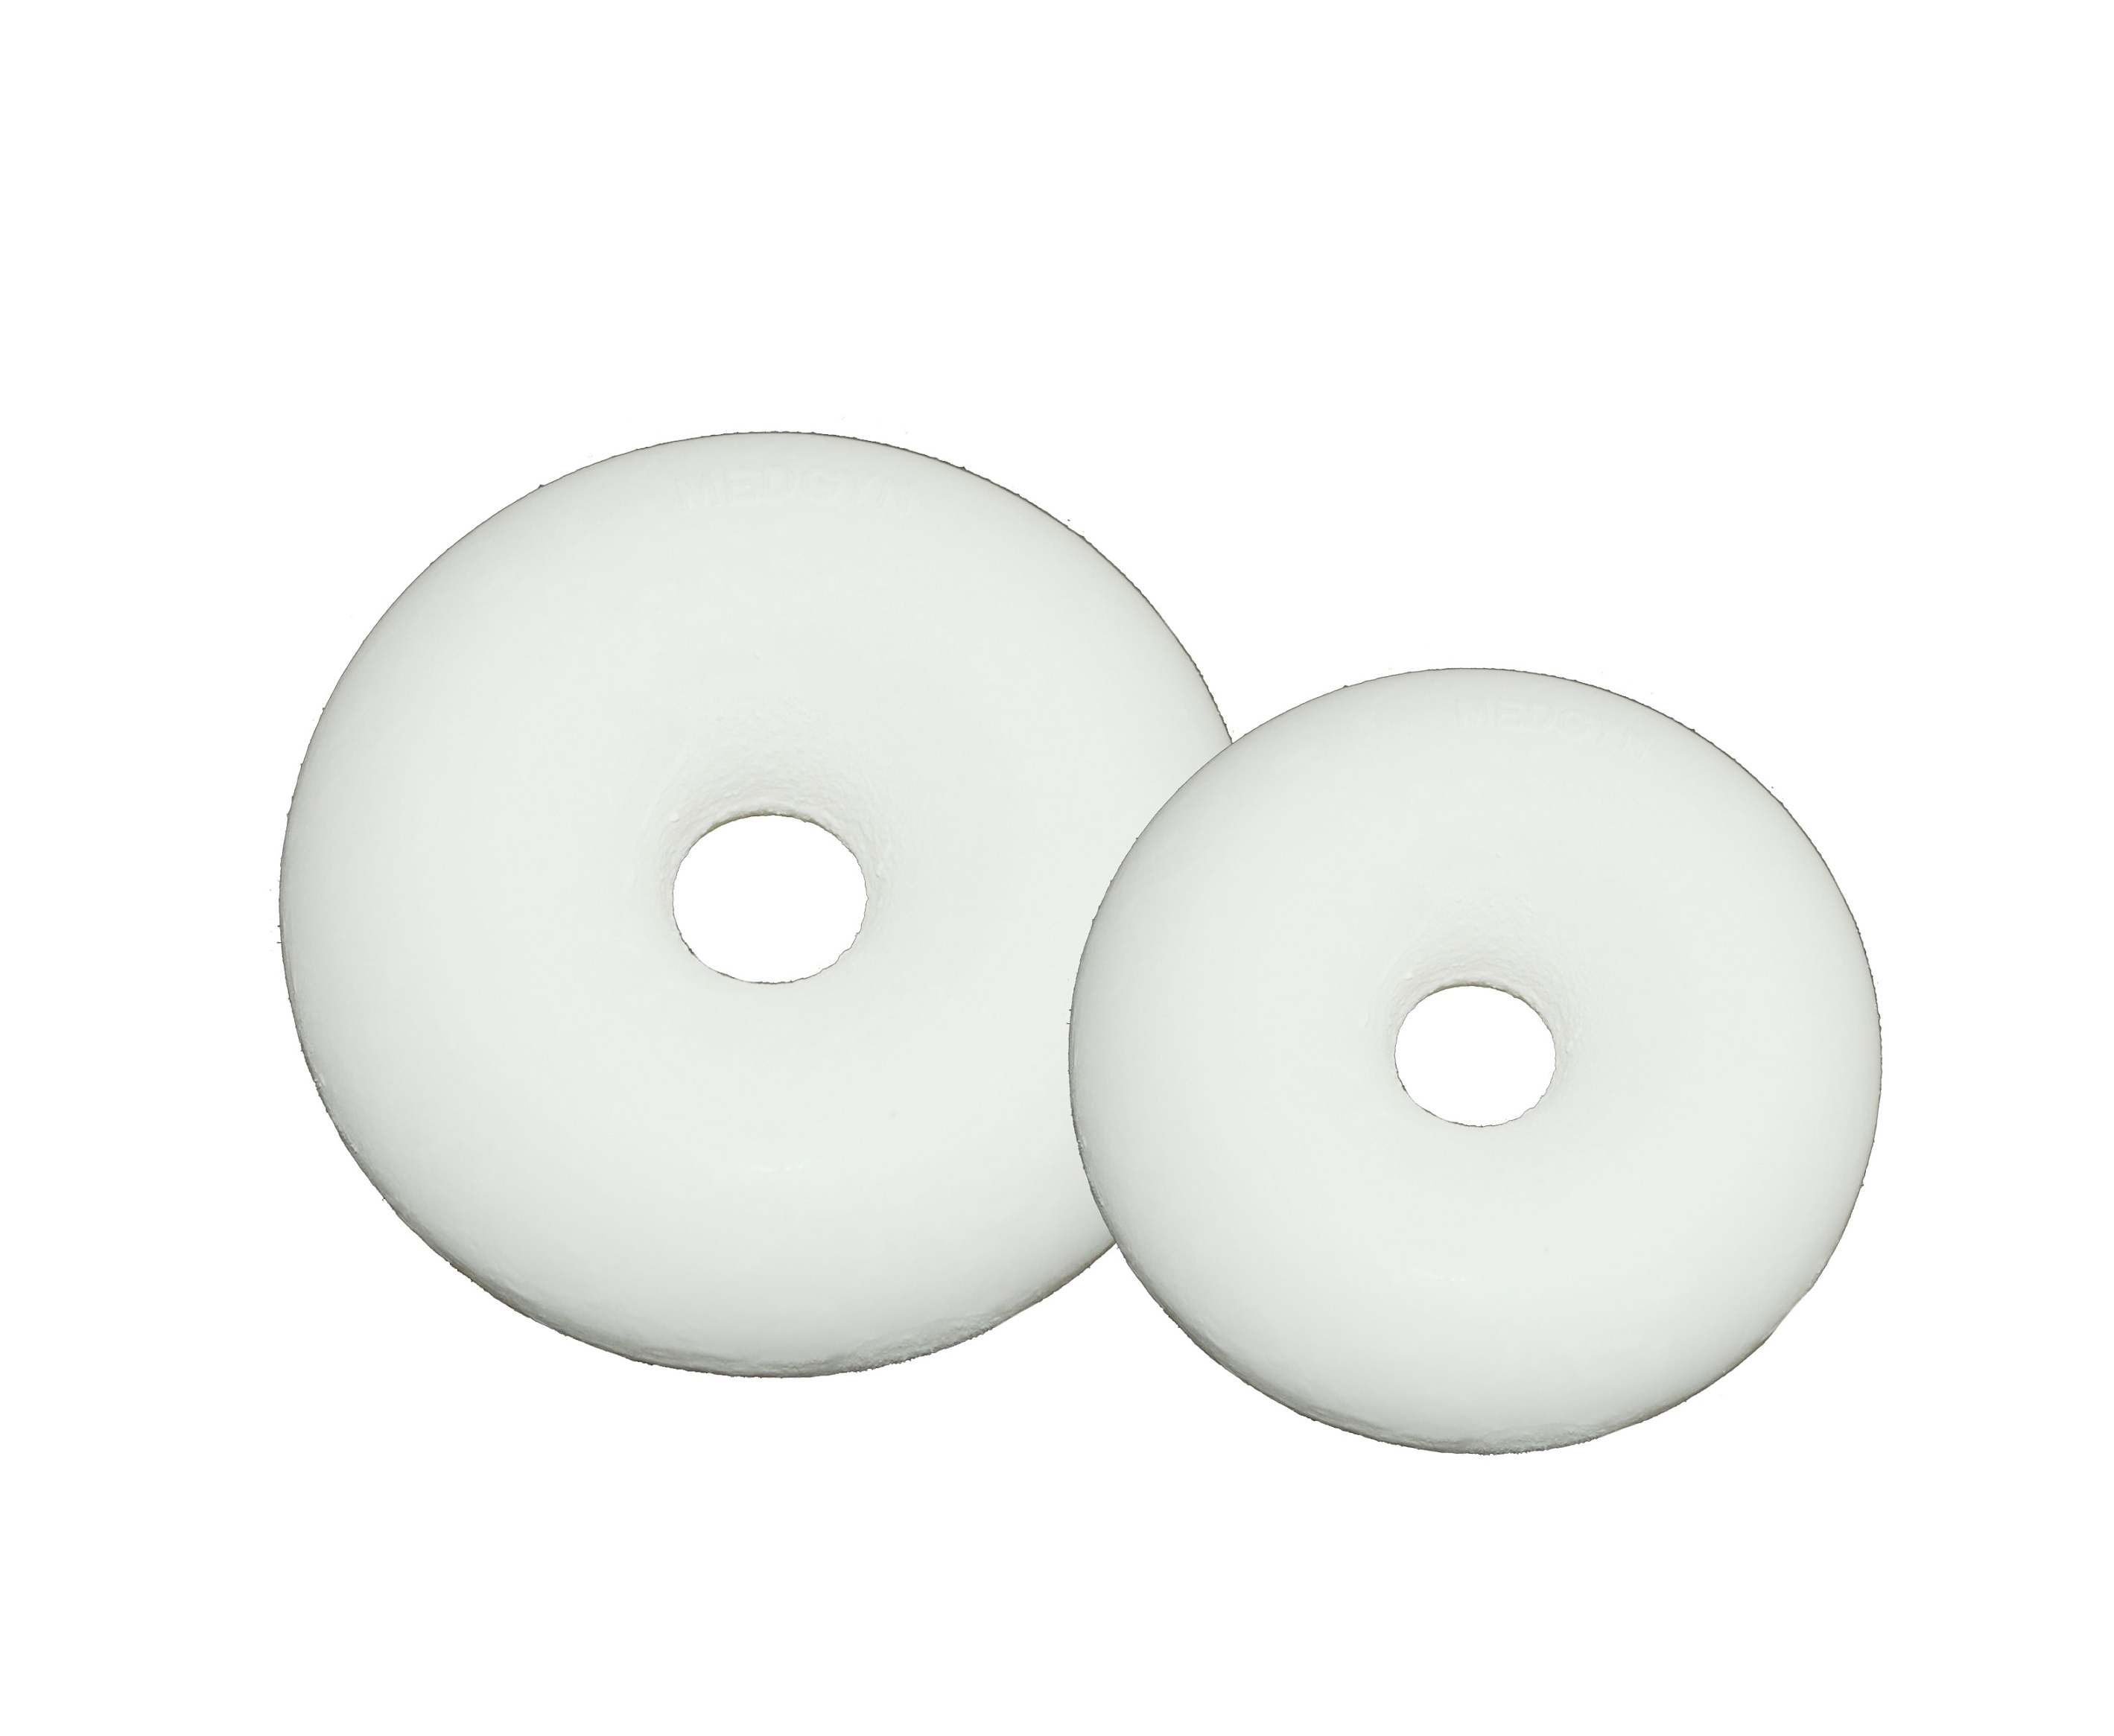 MedGyn Pessary Silicone Donut #2 - 64mm / 2.5"